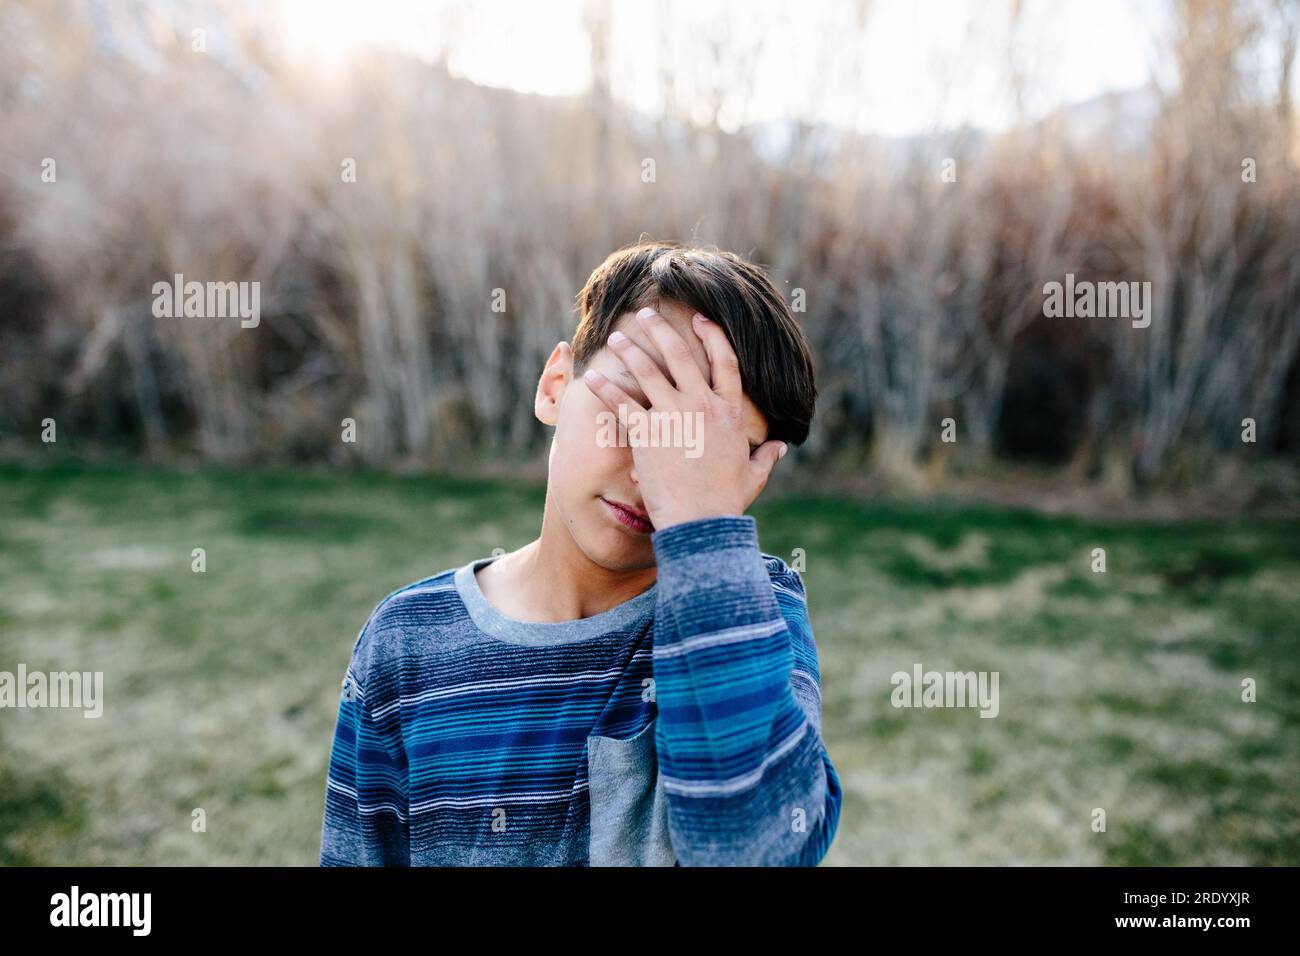 Boy outside appears sad as he covers part of his face with his hand Stock Photo